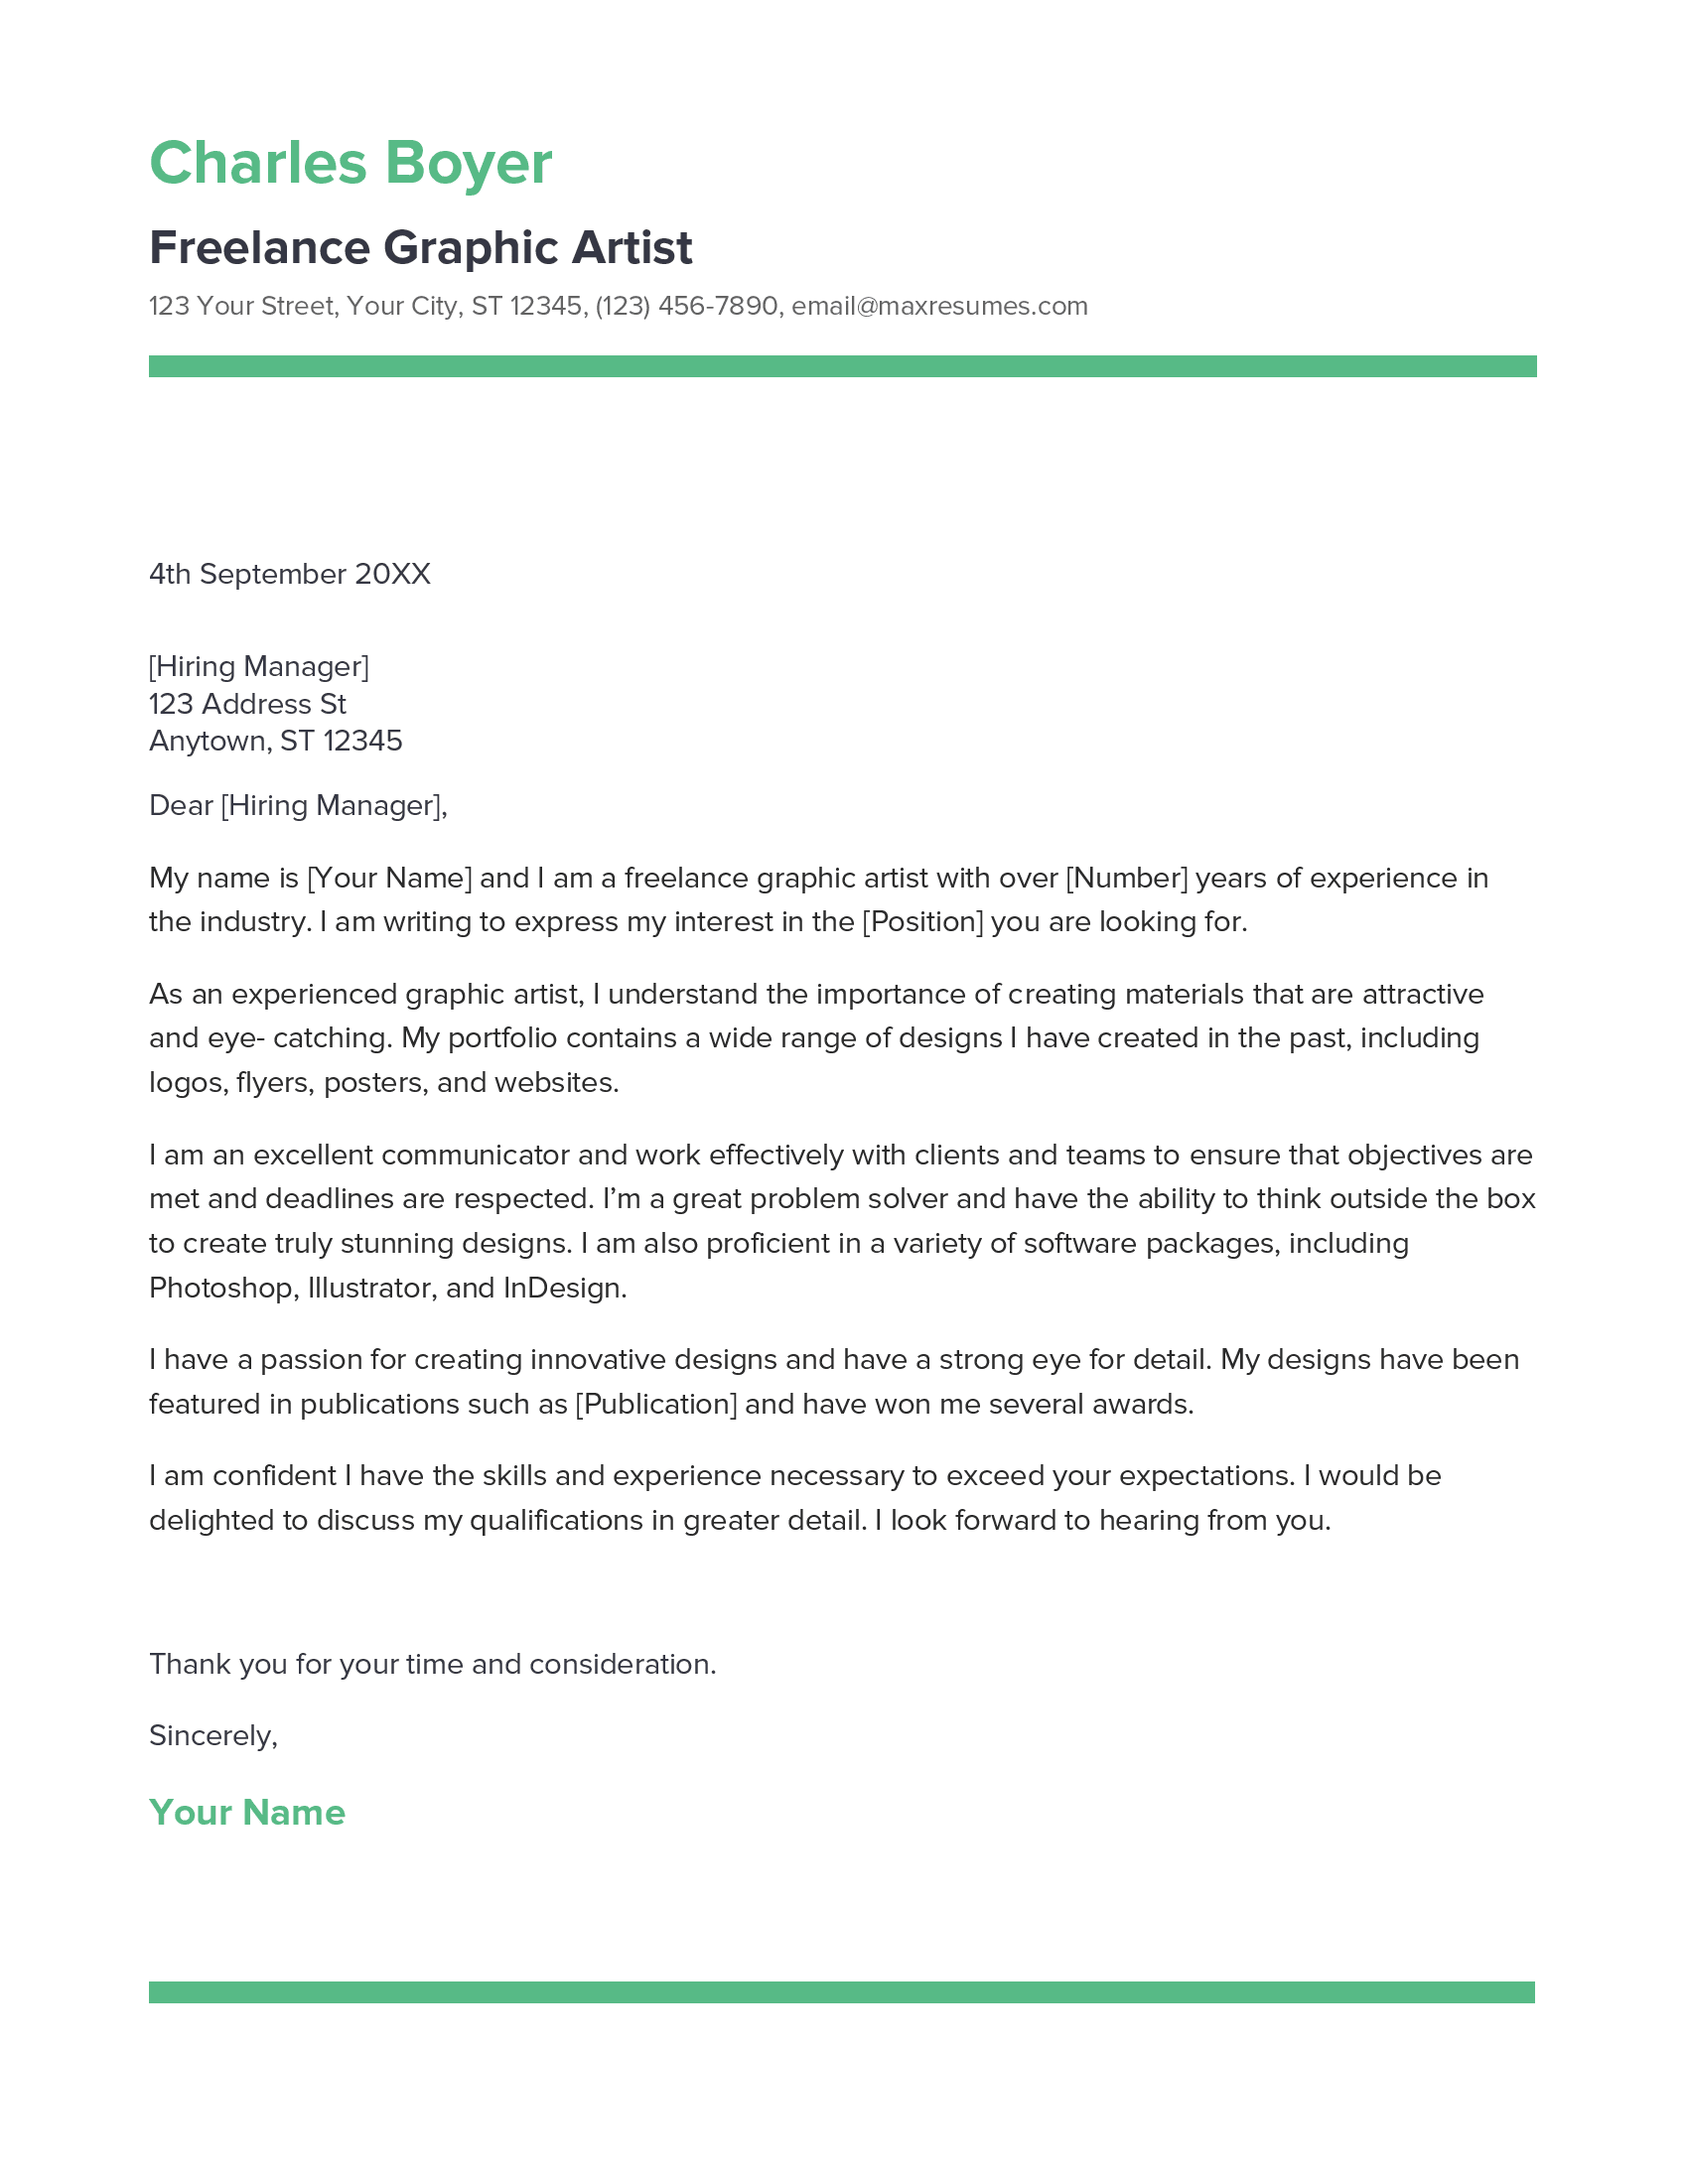 Freelance Graphic Artist Cover Letter Example